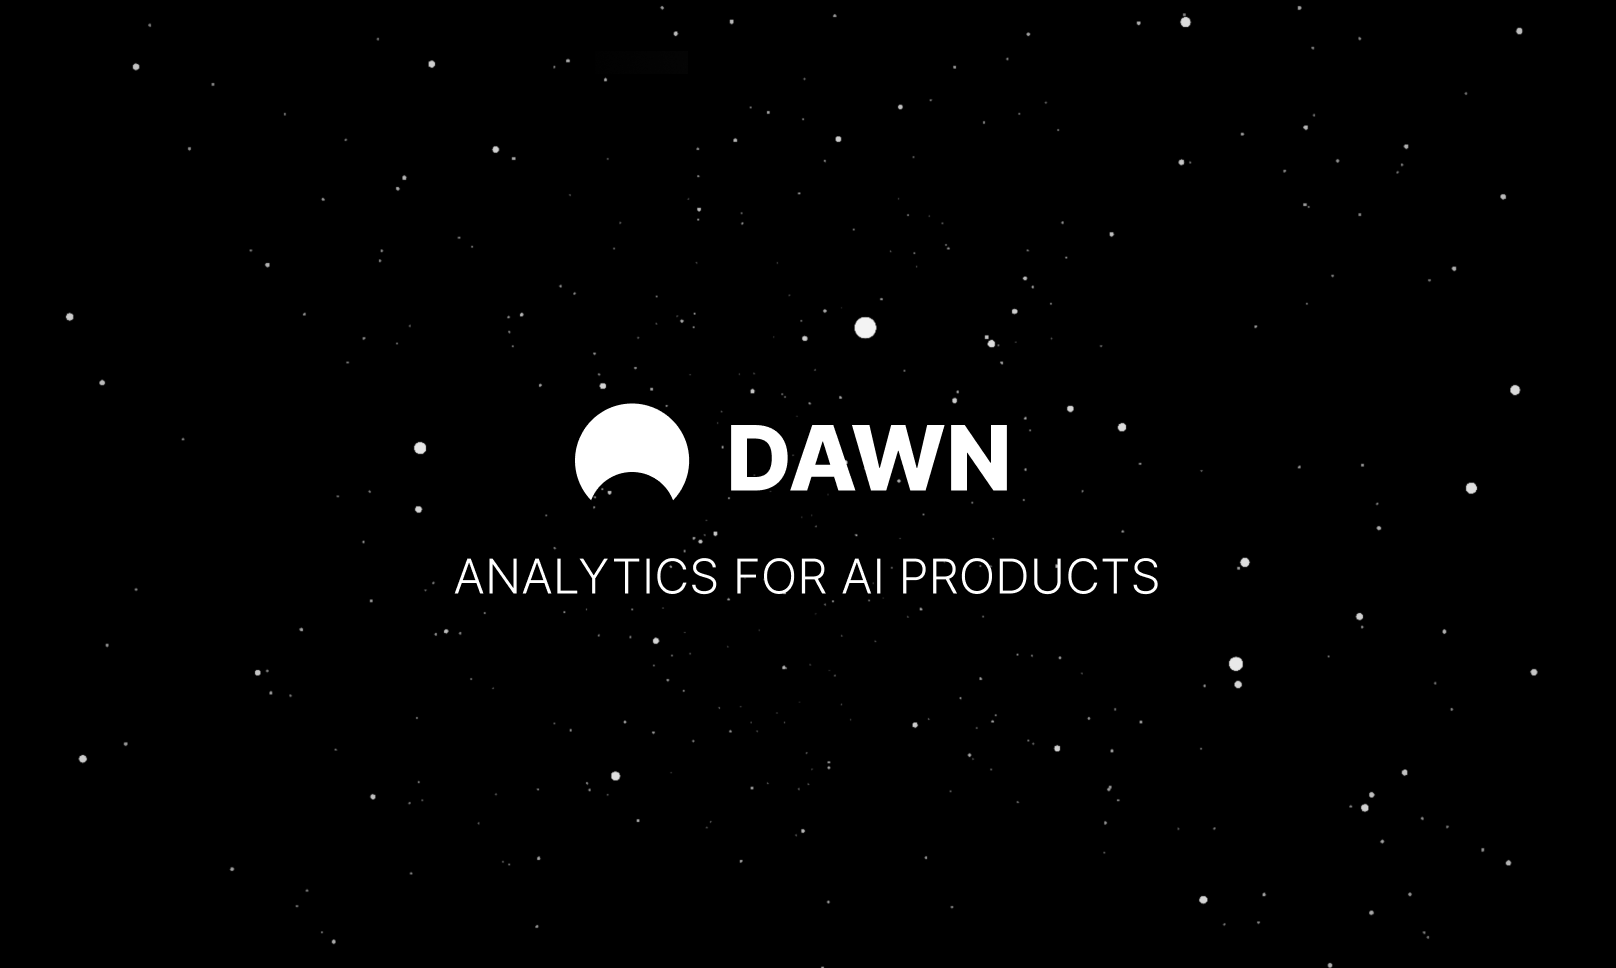 dawn - Analytics for AI products